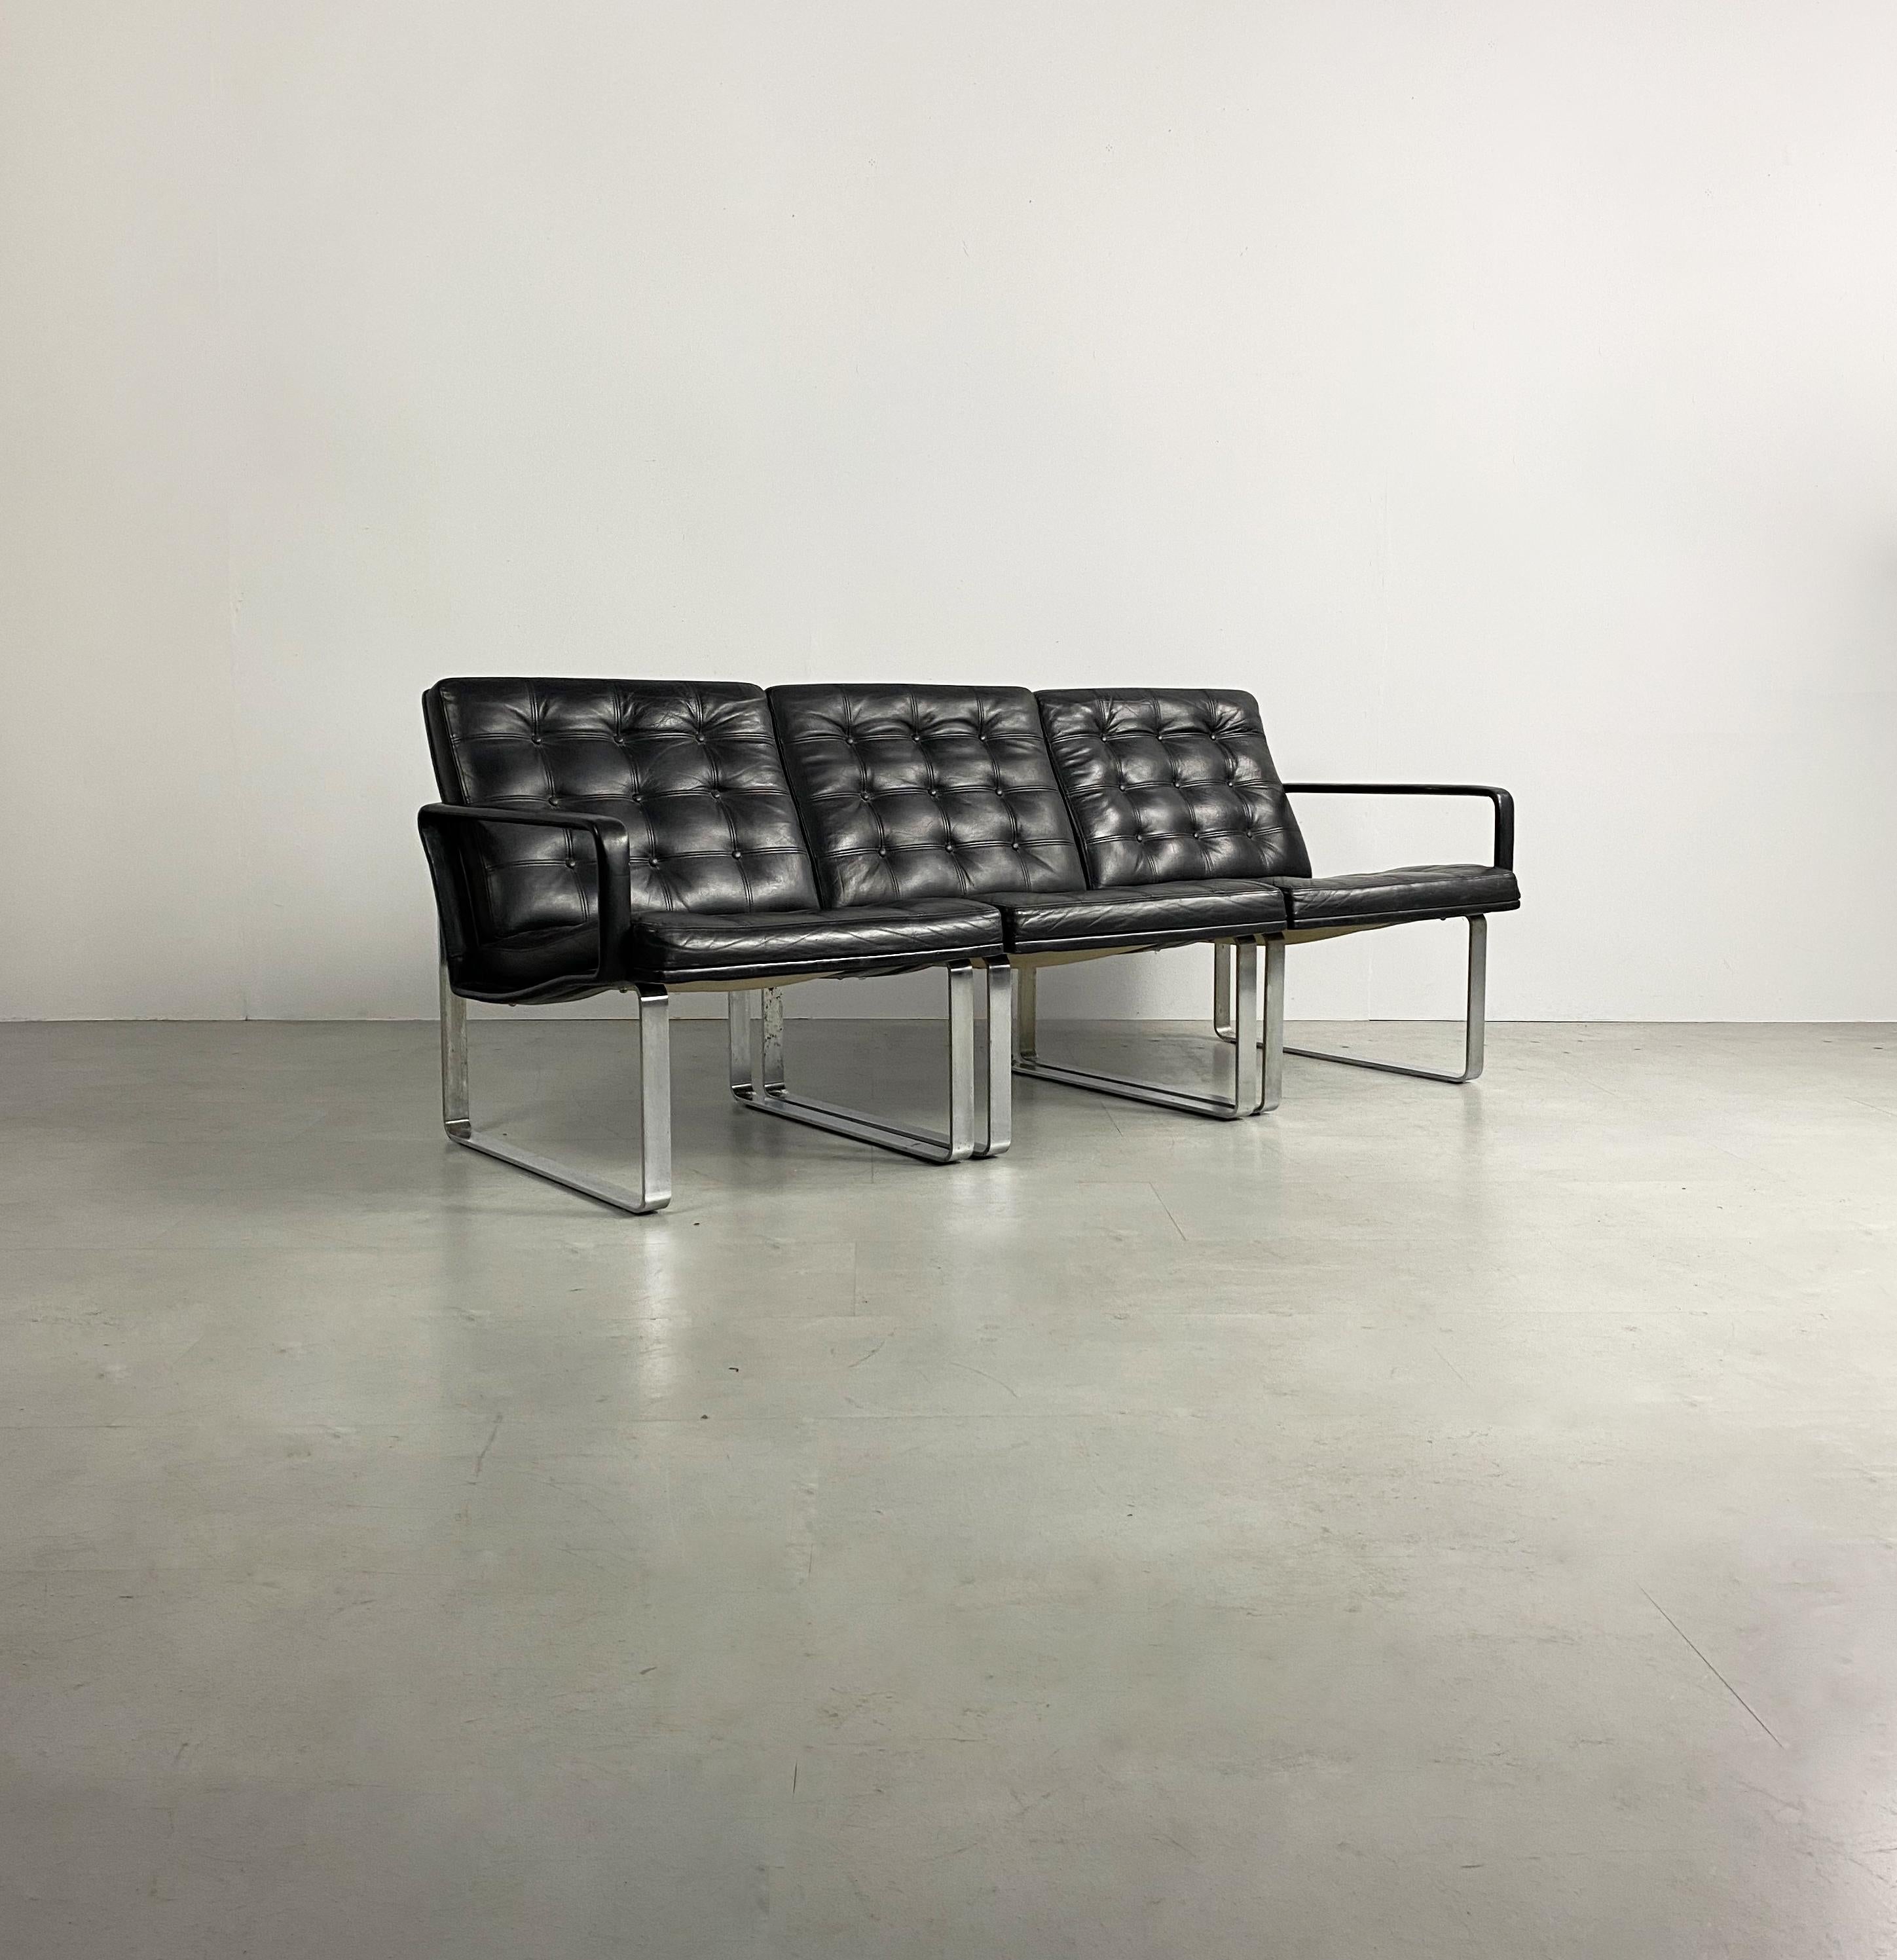 Exquisite modular 3 piece sofa designed by Ole Gjerløv-Knudsen & Torben Lind and produced by Danish manufacturer Cado, circa 1960. Upholstered in black leather with buttoned patchwork detailing, supported by a sculptural steel frame. This sofa can